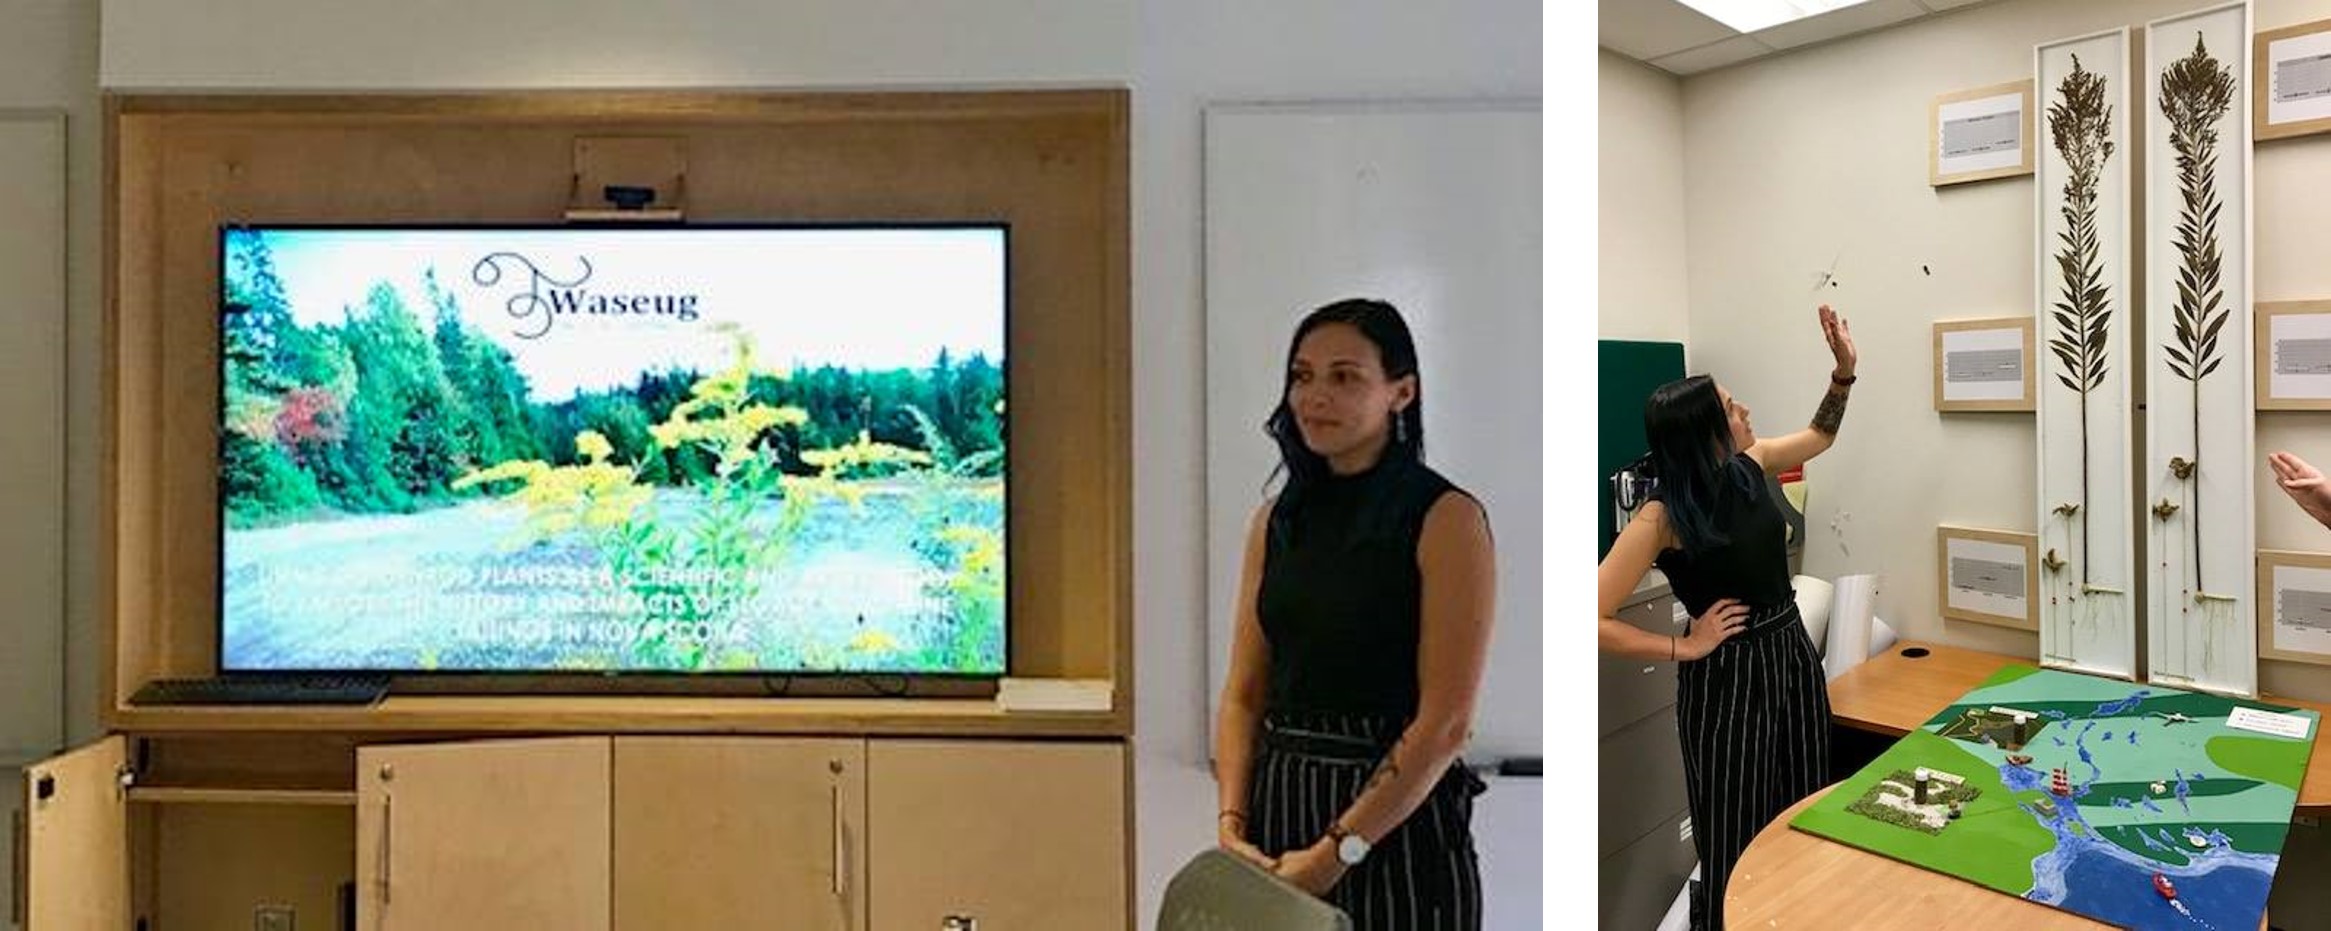 2-photo array of Brittany Hill presenting her honours thesis and showing her art-science project with goldenrods and a 3-d map of Montague in HRM.